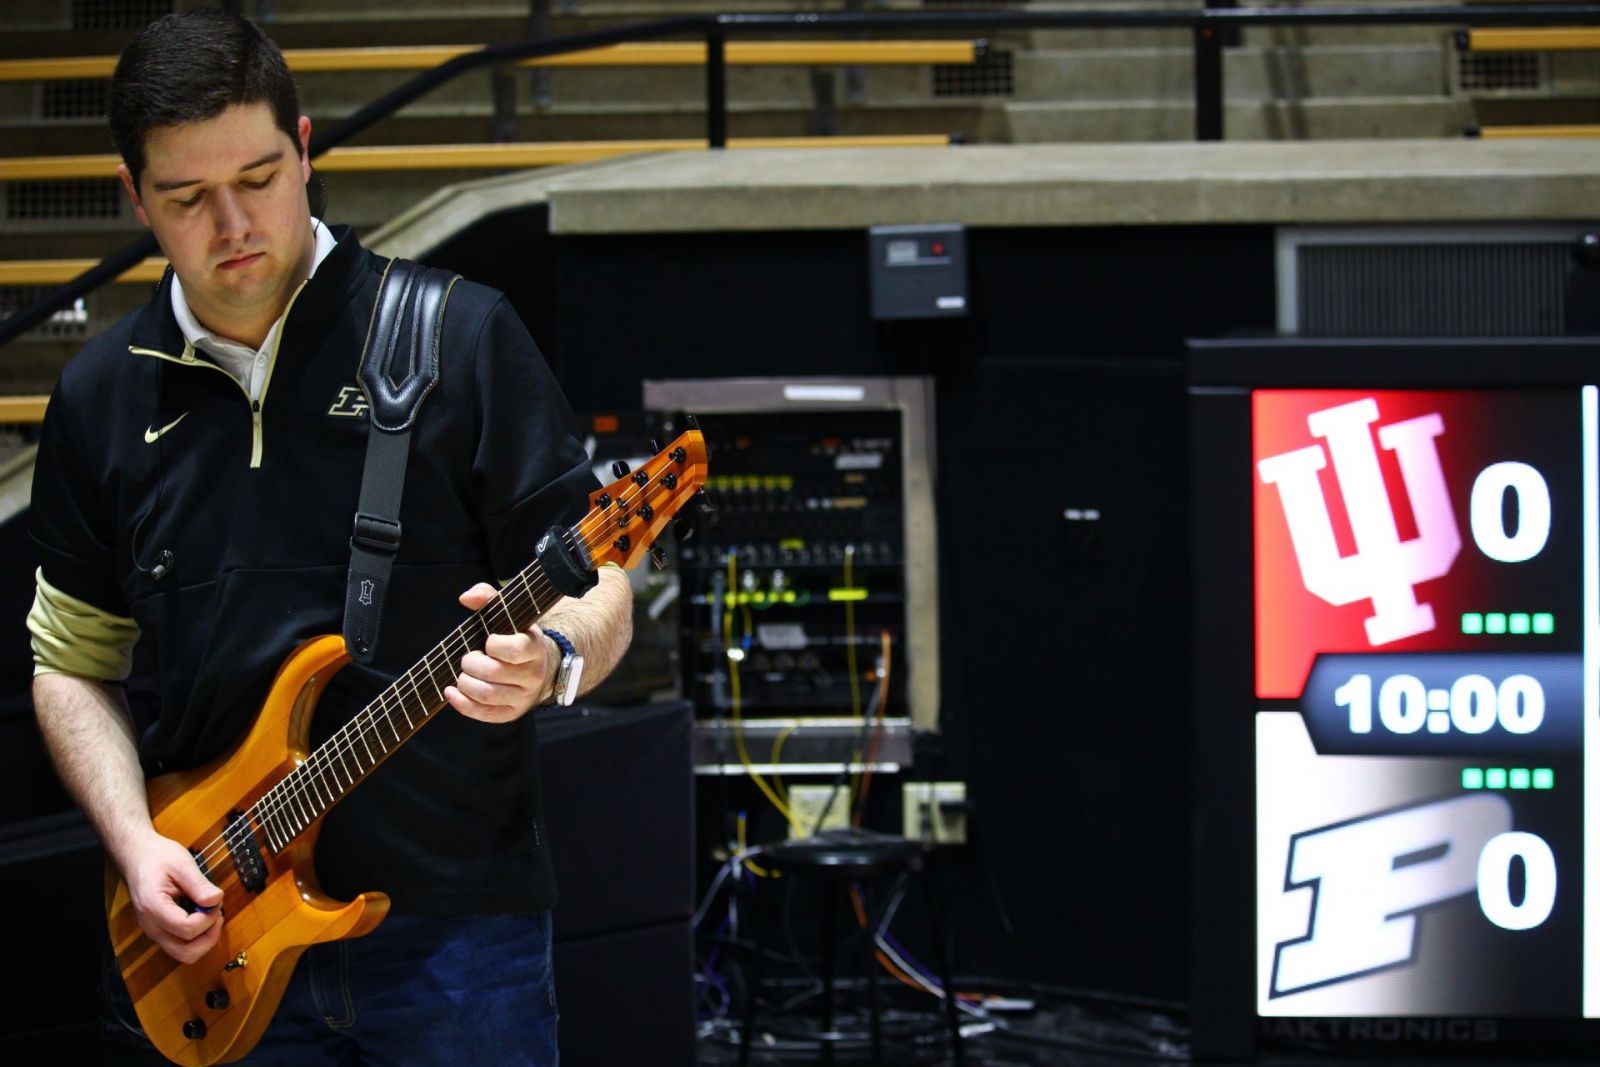 Noah Scott, a Purdue alumnus and current Purdue for Life employee, who will perform on the Mackey guitar on February 10. (Purdue University photo/Nick Pompella)